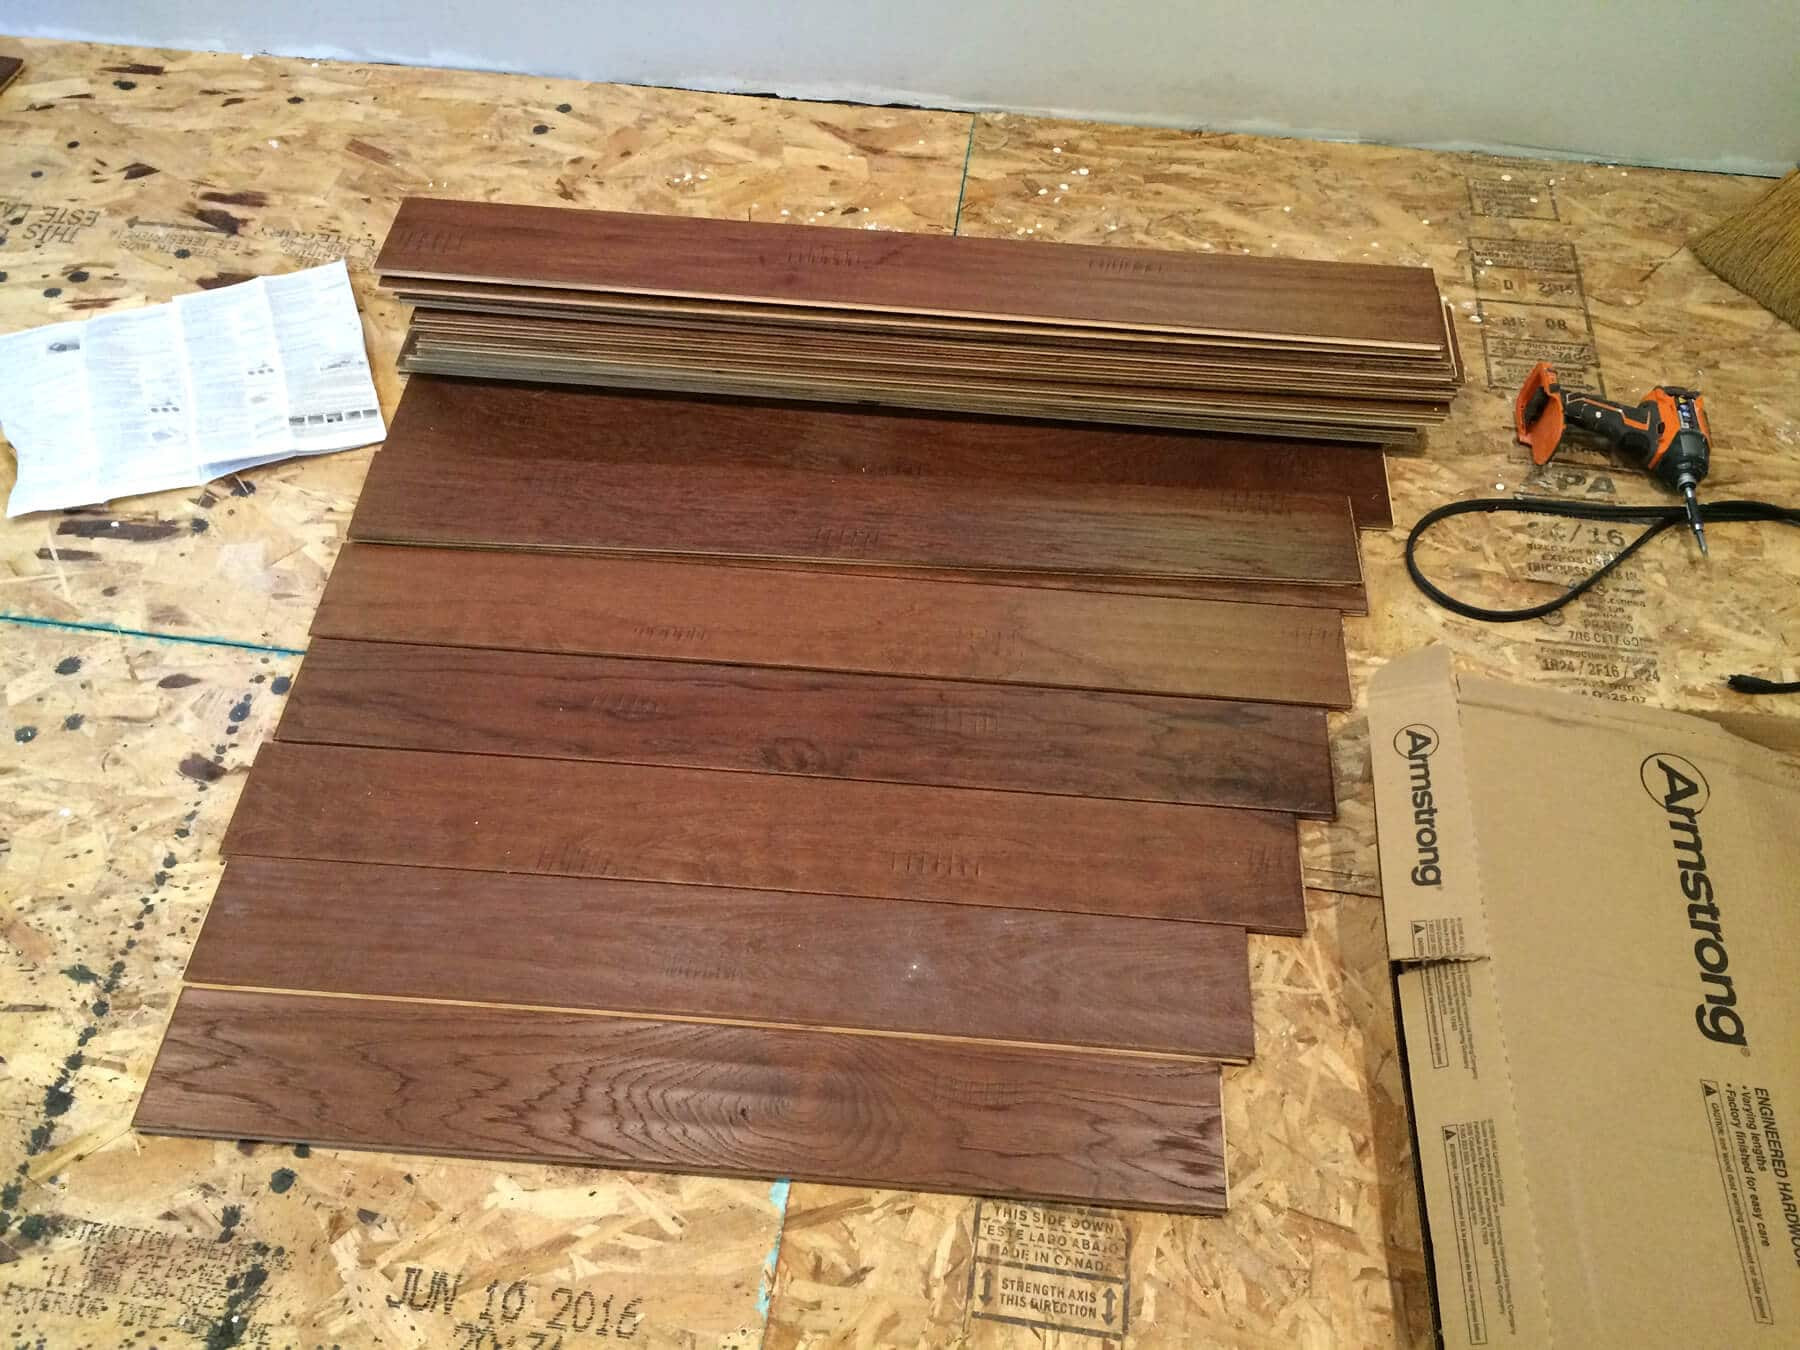 acceptable gap in hardwood floor of the micro dwelling project part 5 flooring the daring gourmet with regard to laying down the sub flooring was fine but honestly the thought of installing hardwood floors seemed extremely intimidating we were pretty nervous going in